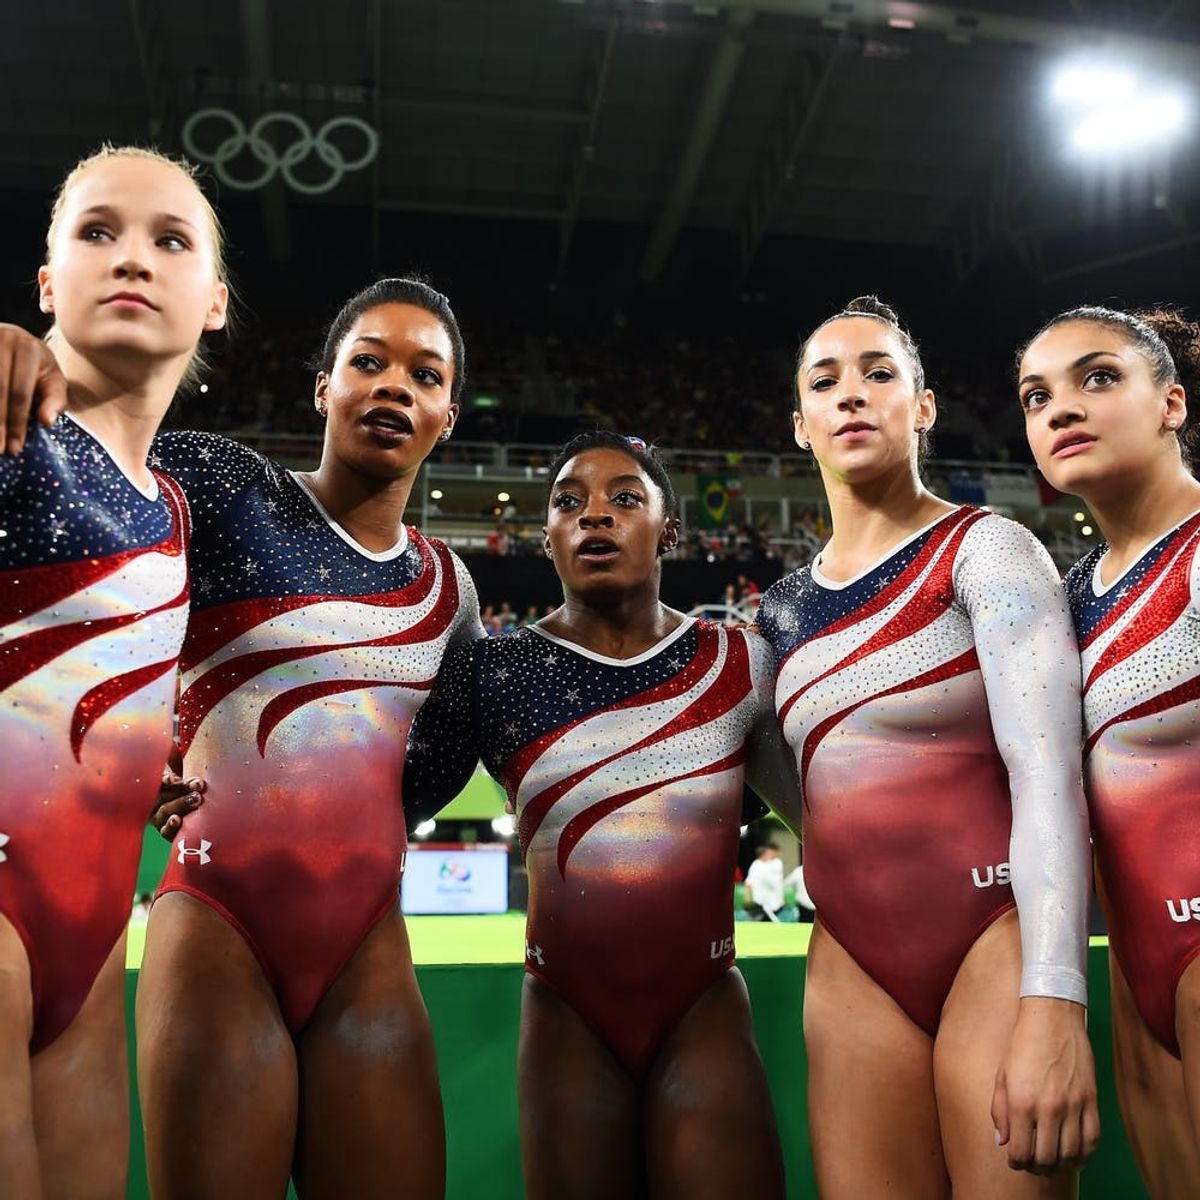 How the Olympic Leotard Went from Basic to Blinged Out